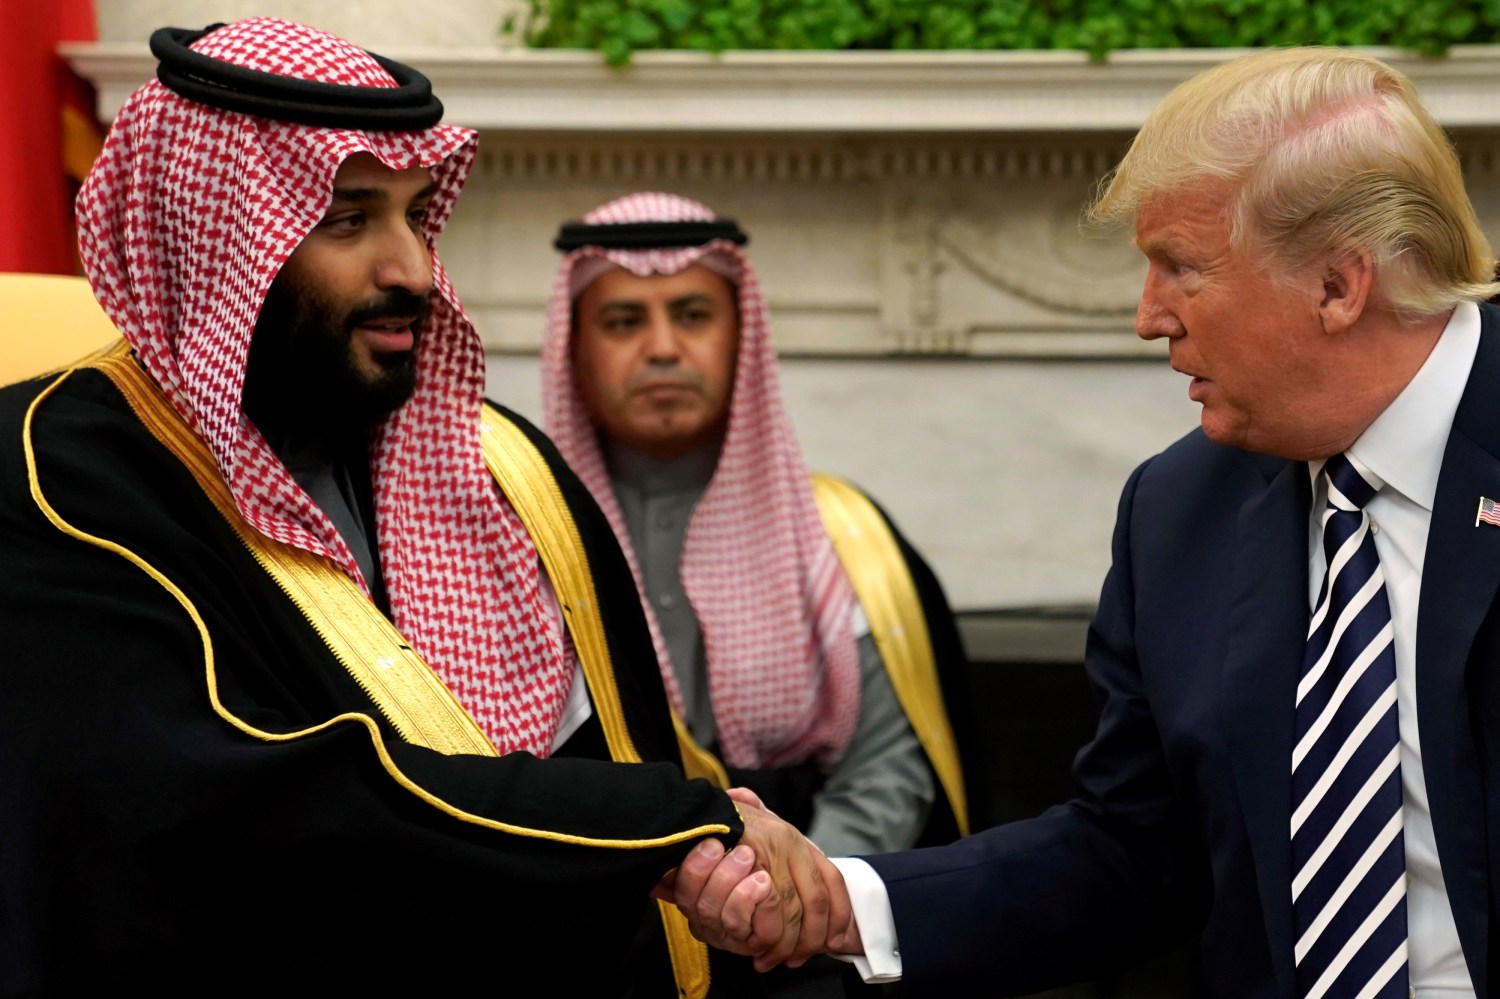 U.S. President Donald Trump shakes hands with Saudi Arabia's Crown Prince Mohammed bin Salman in the Oval Office at the White House in Washington